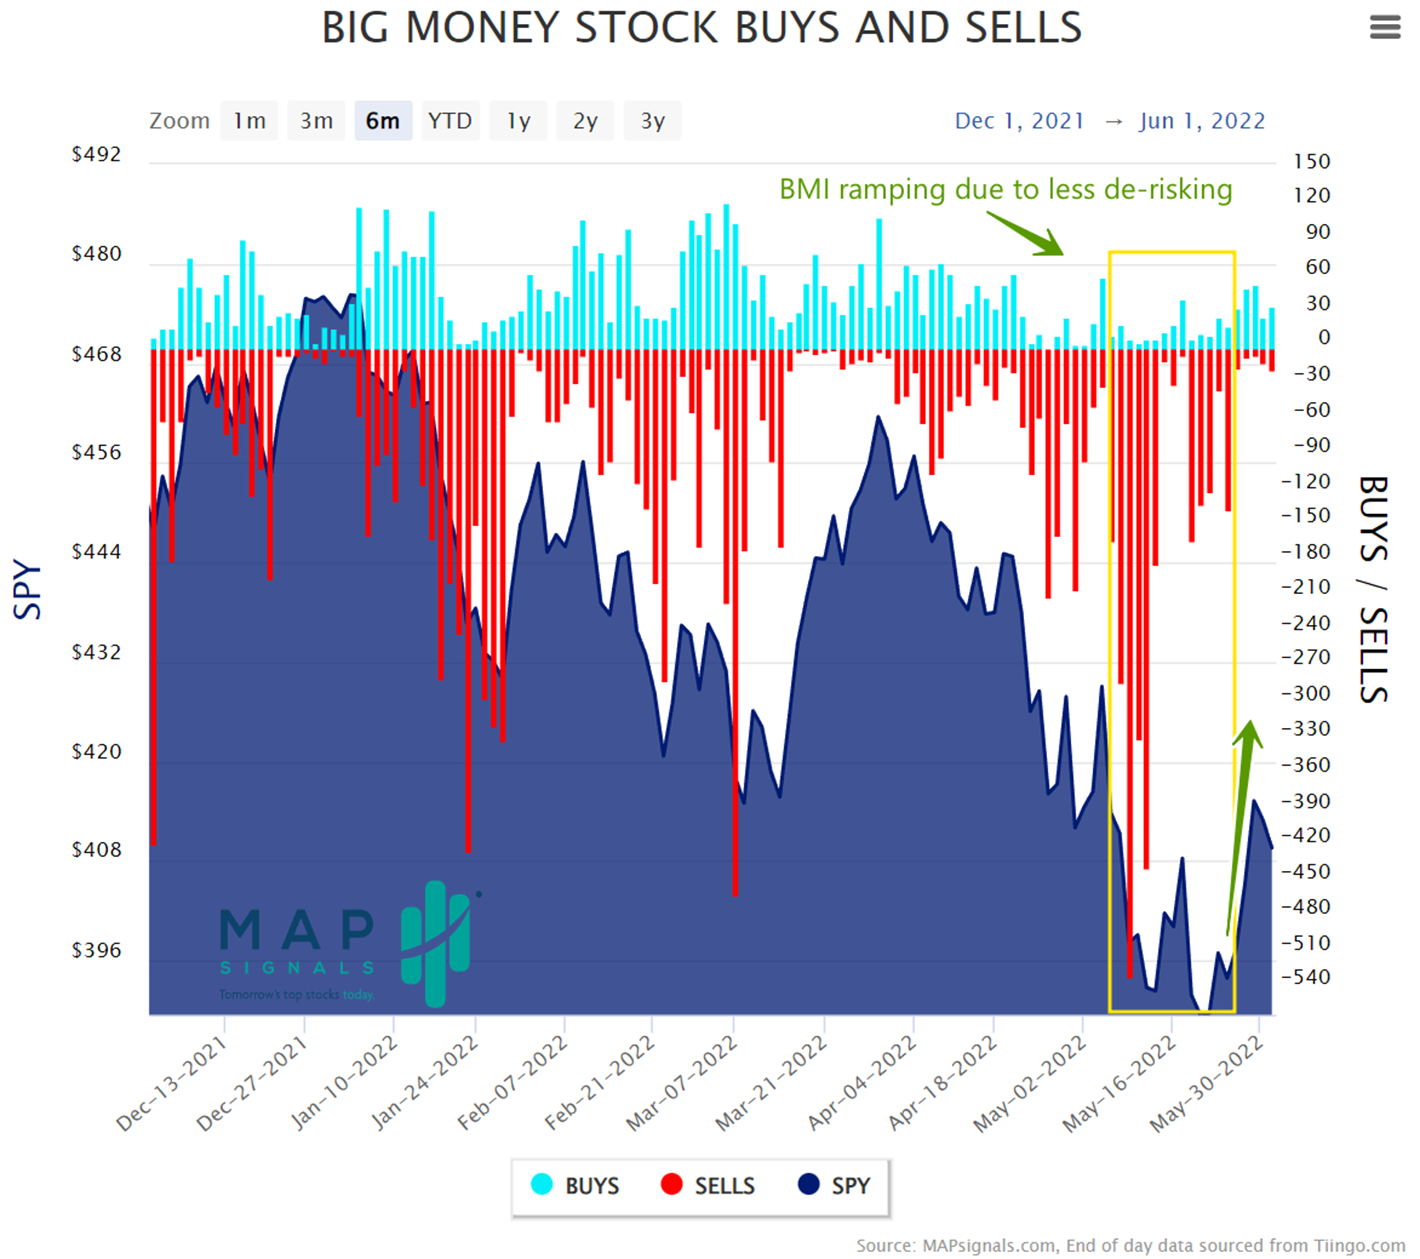 Big Money stock buys and sells | BMI ramping due to less de-risking